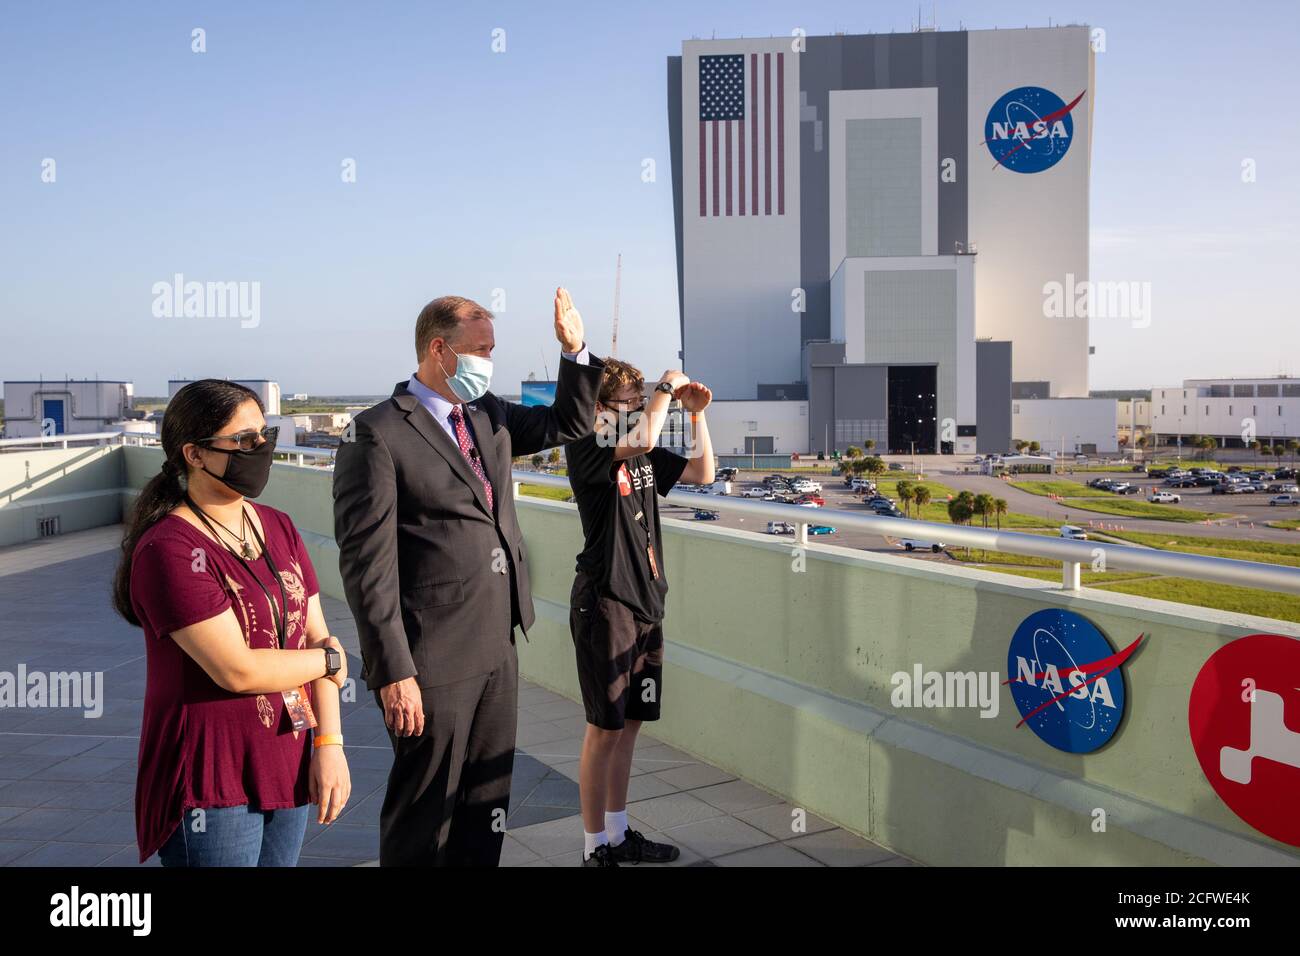 CAPE CANVERAL, FL, USA - 30 July 2020 - NASA Administrator Jim Bridenstine, center, watches Mars 2020 launch on the observation deck of the Operations Stock Photo